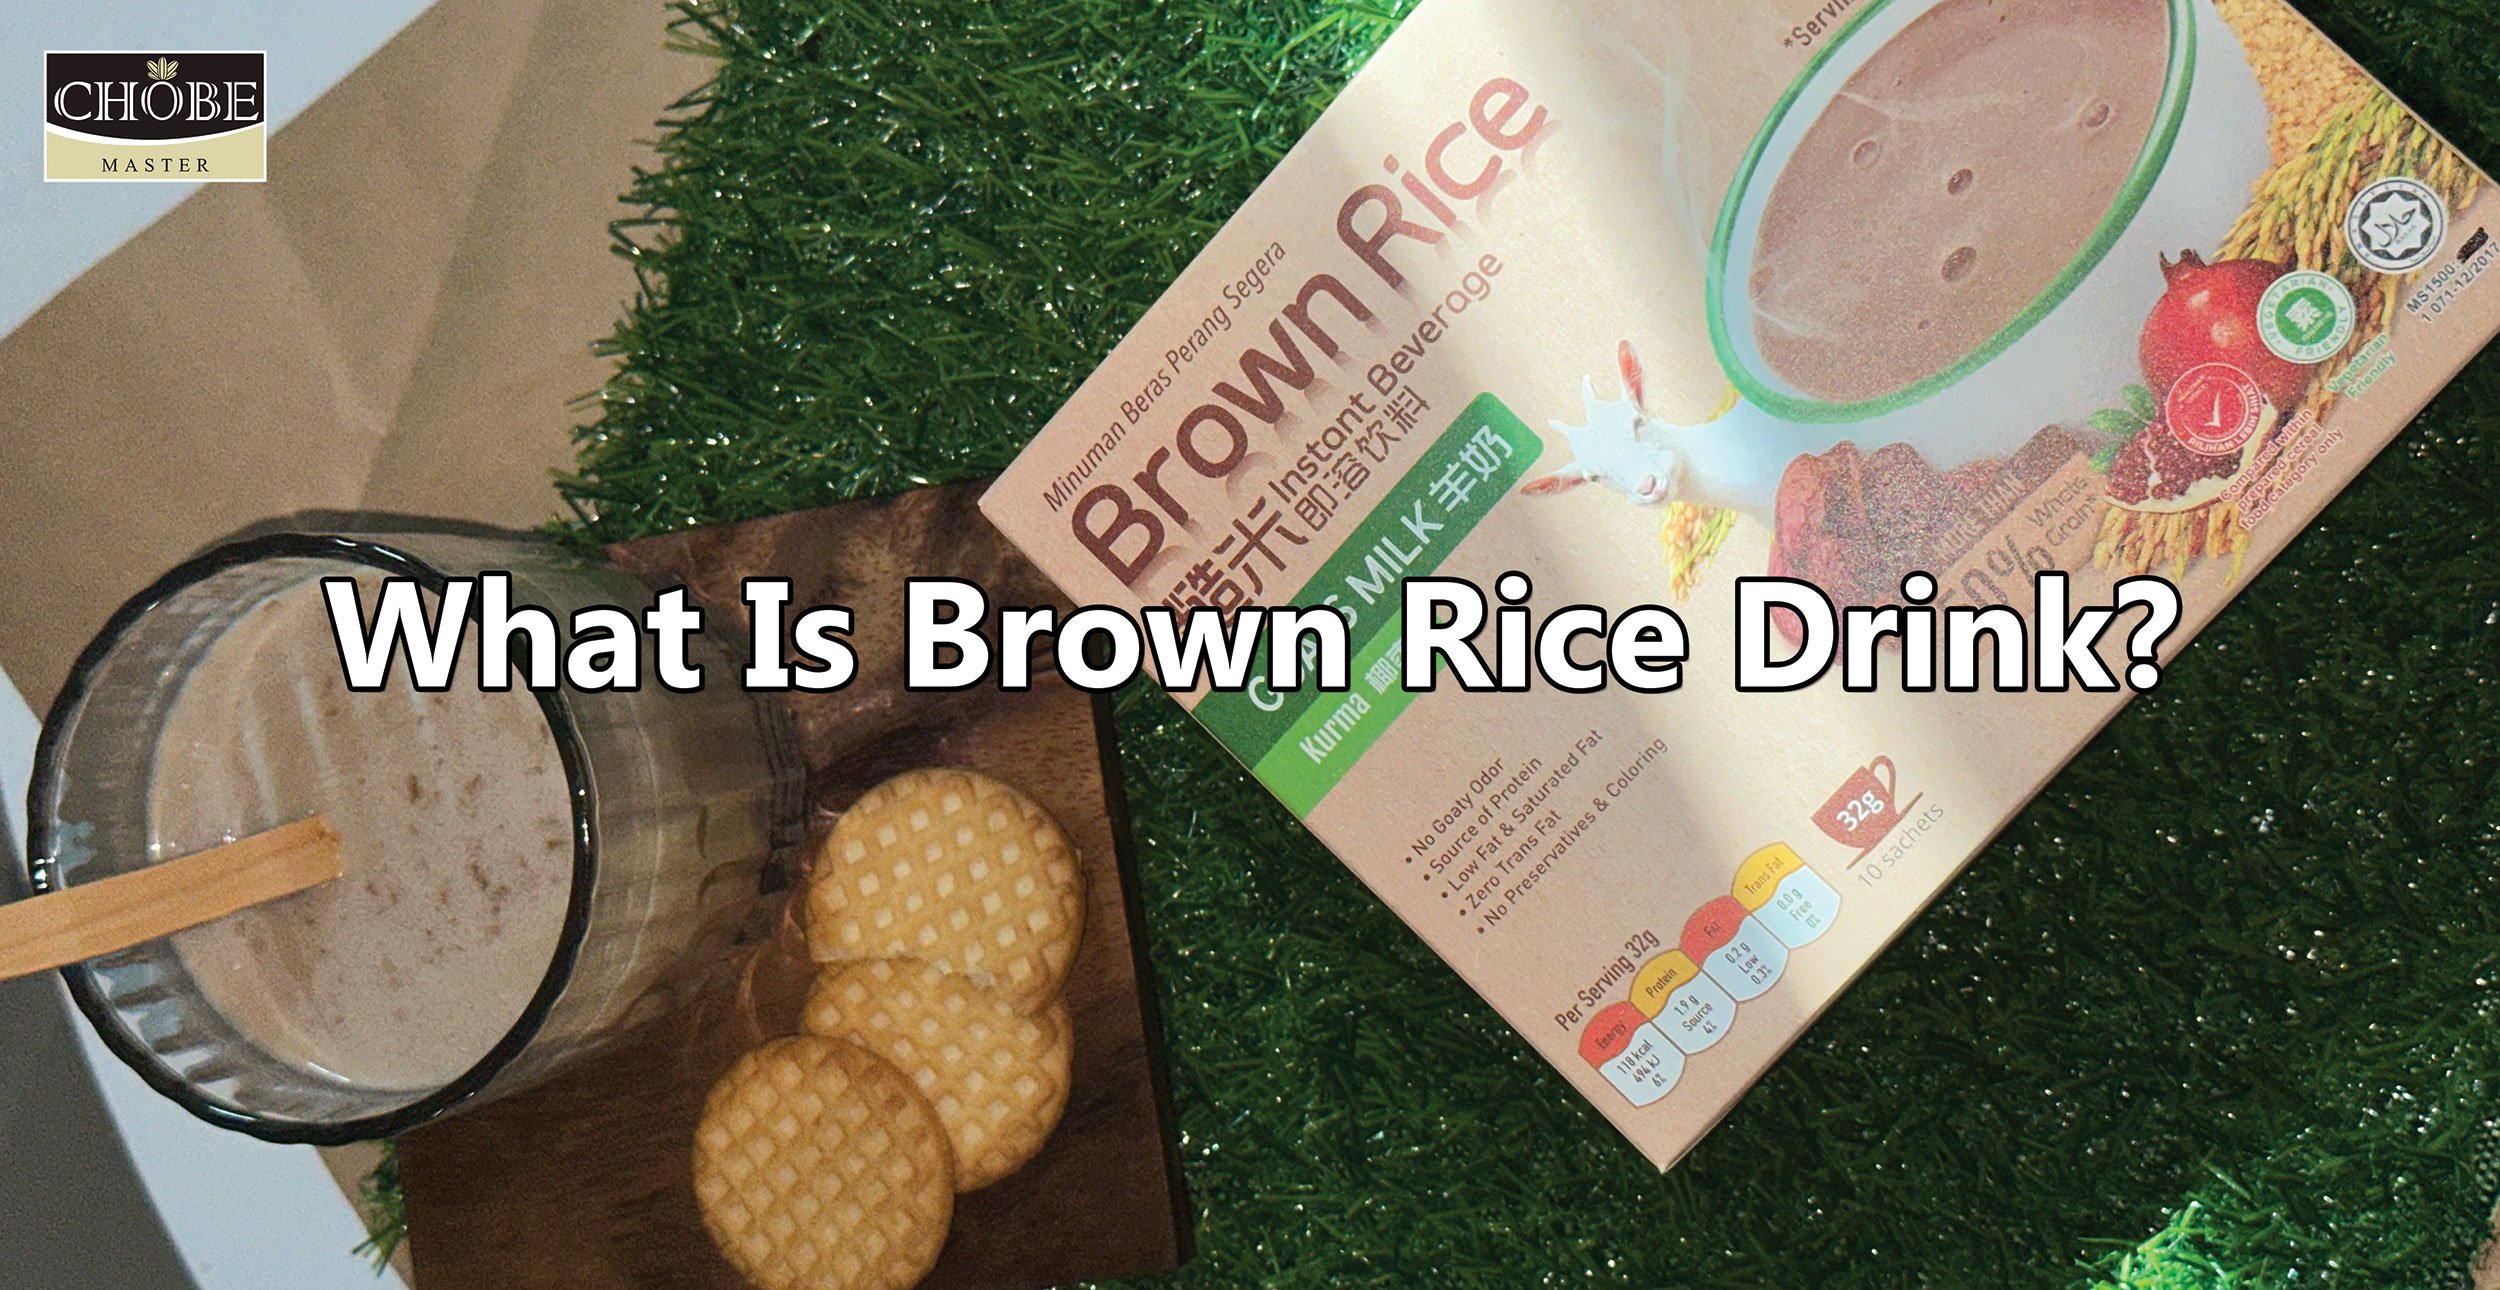 What Is Brown Rice Drink?